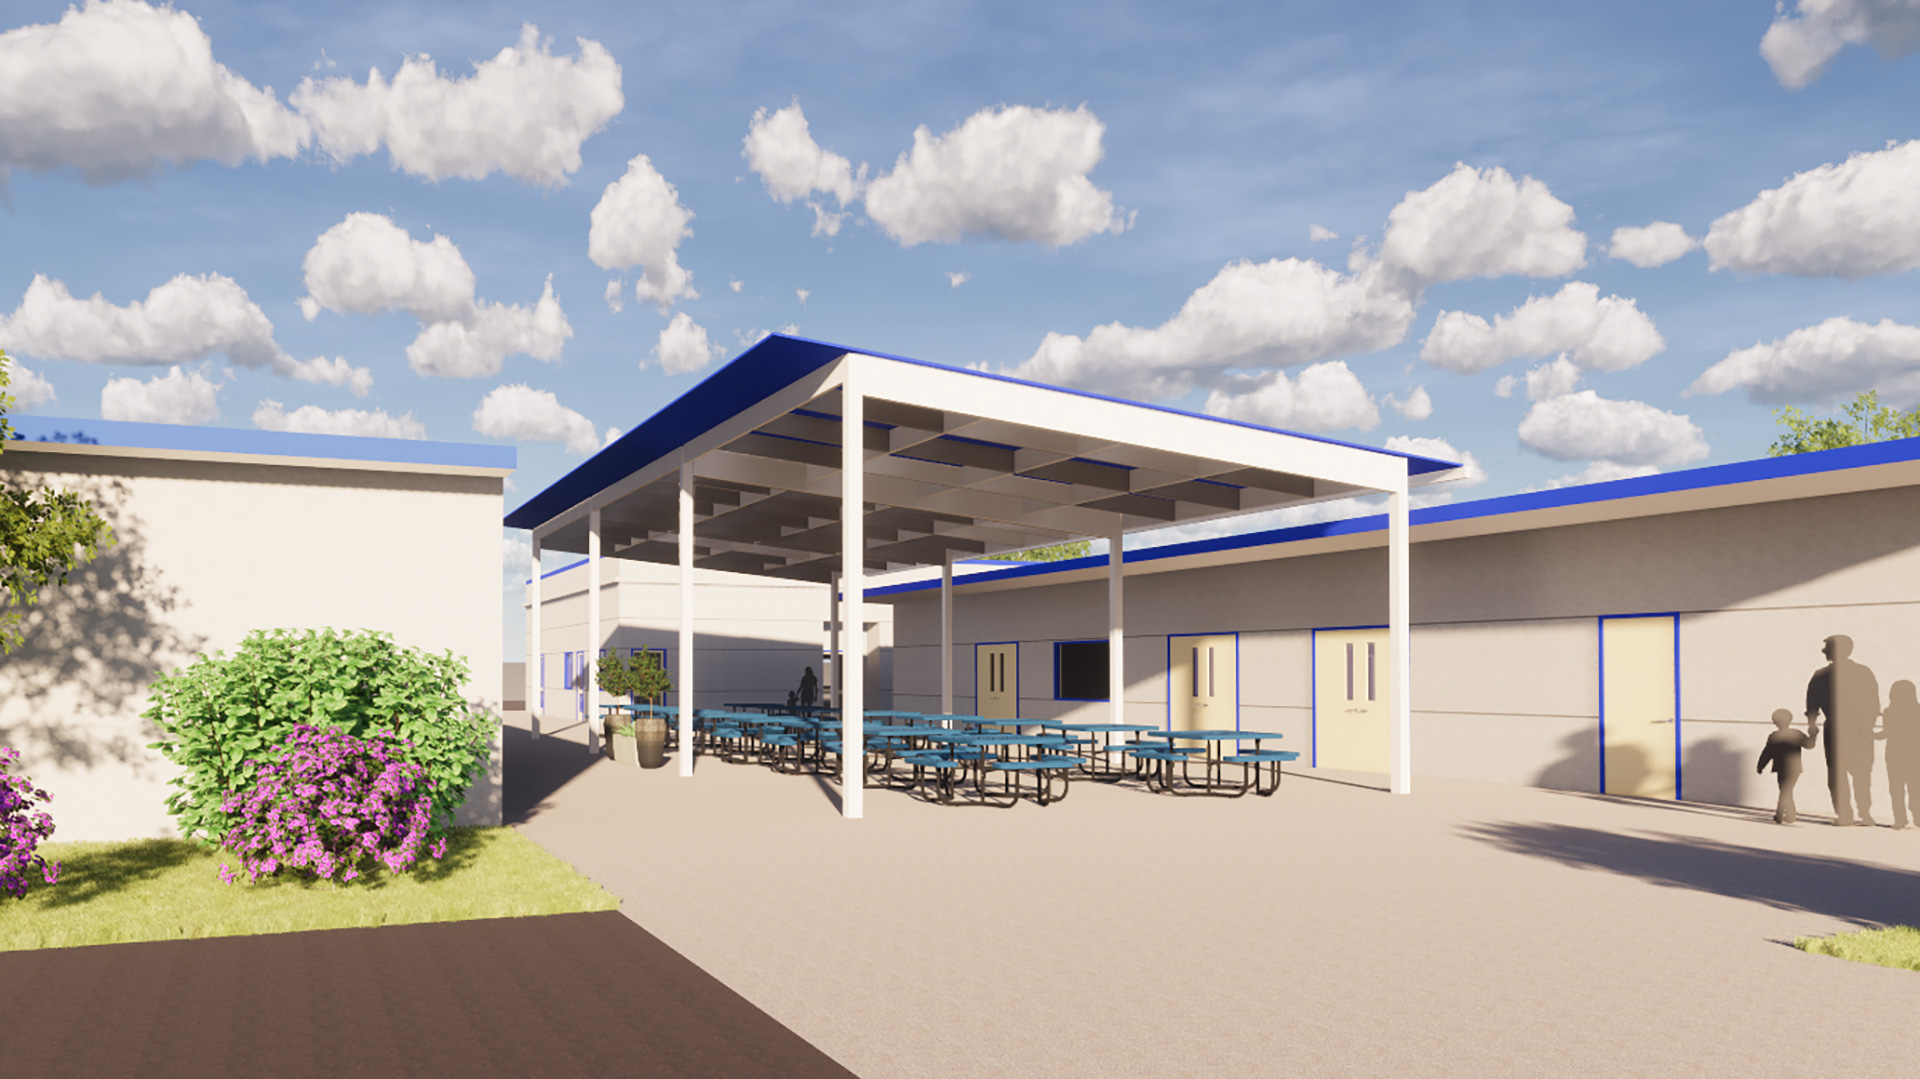 Early render of shade structure, with white poles and supports, with a blue roof, over lunch tables.